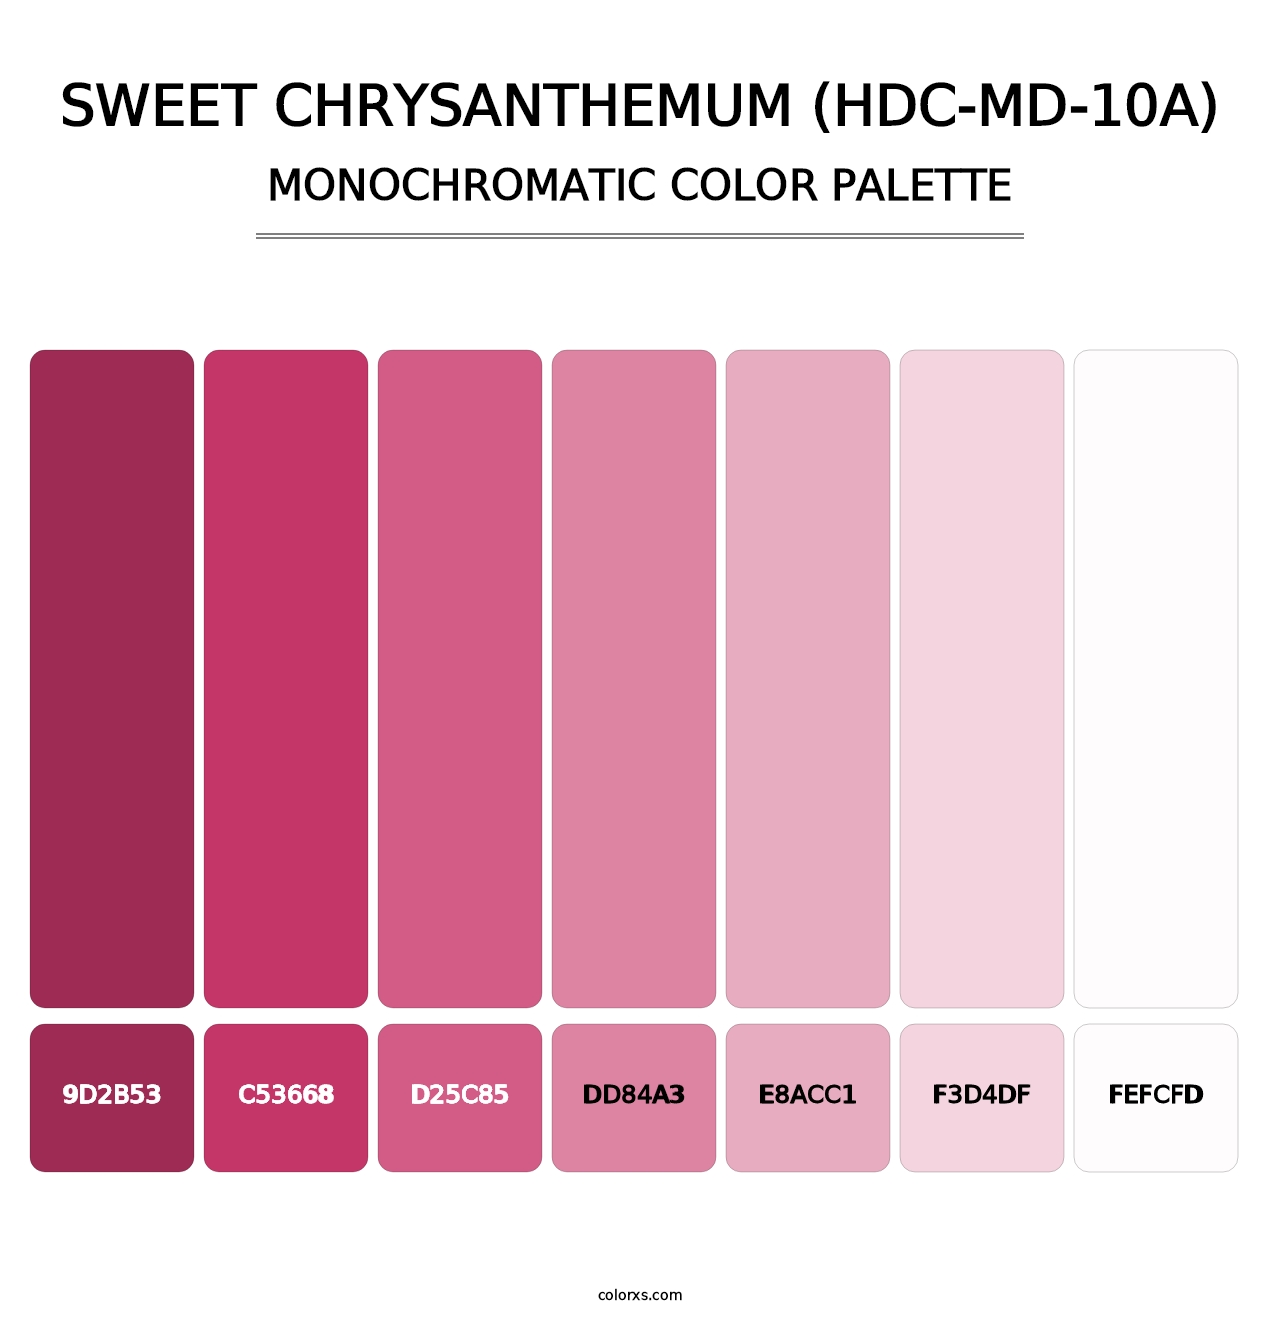 Sweet Chrysanthemum (HDC-MD-10A) - Monochromatic Color Palette